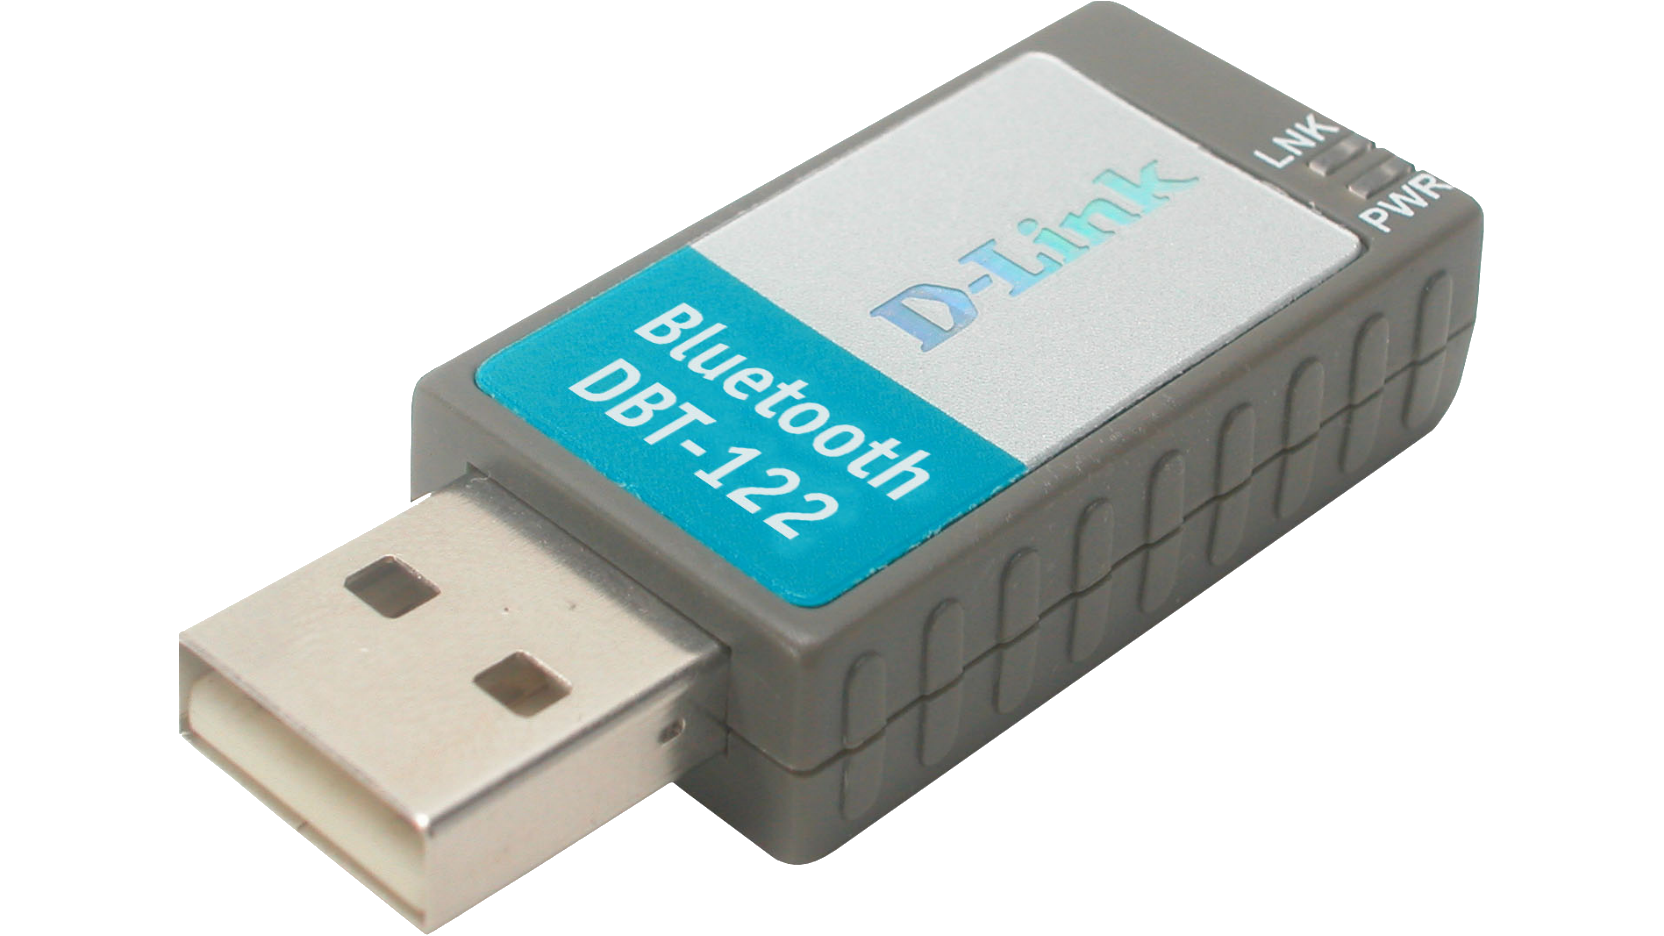 DLINK USB BLUETOOTH ADAPTER FOR PC